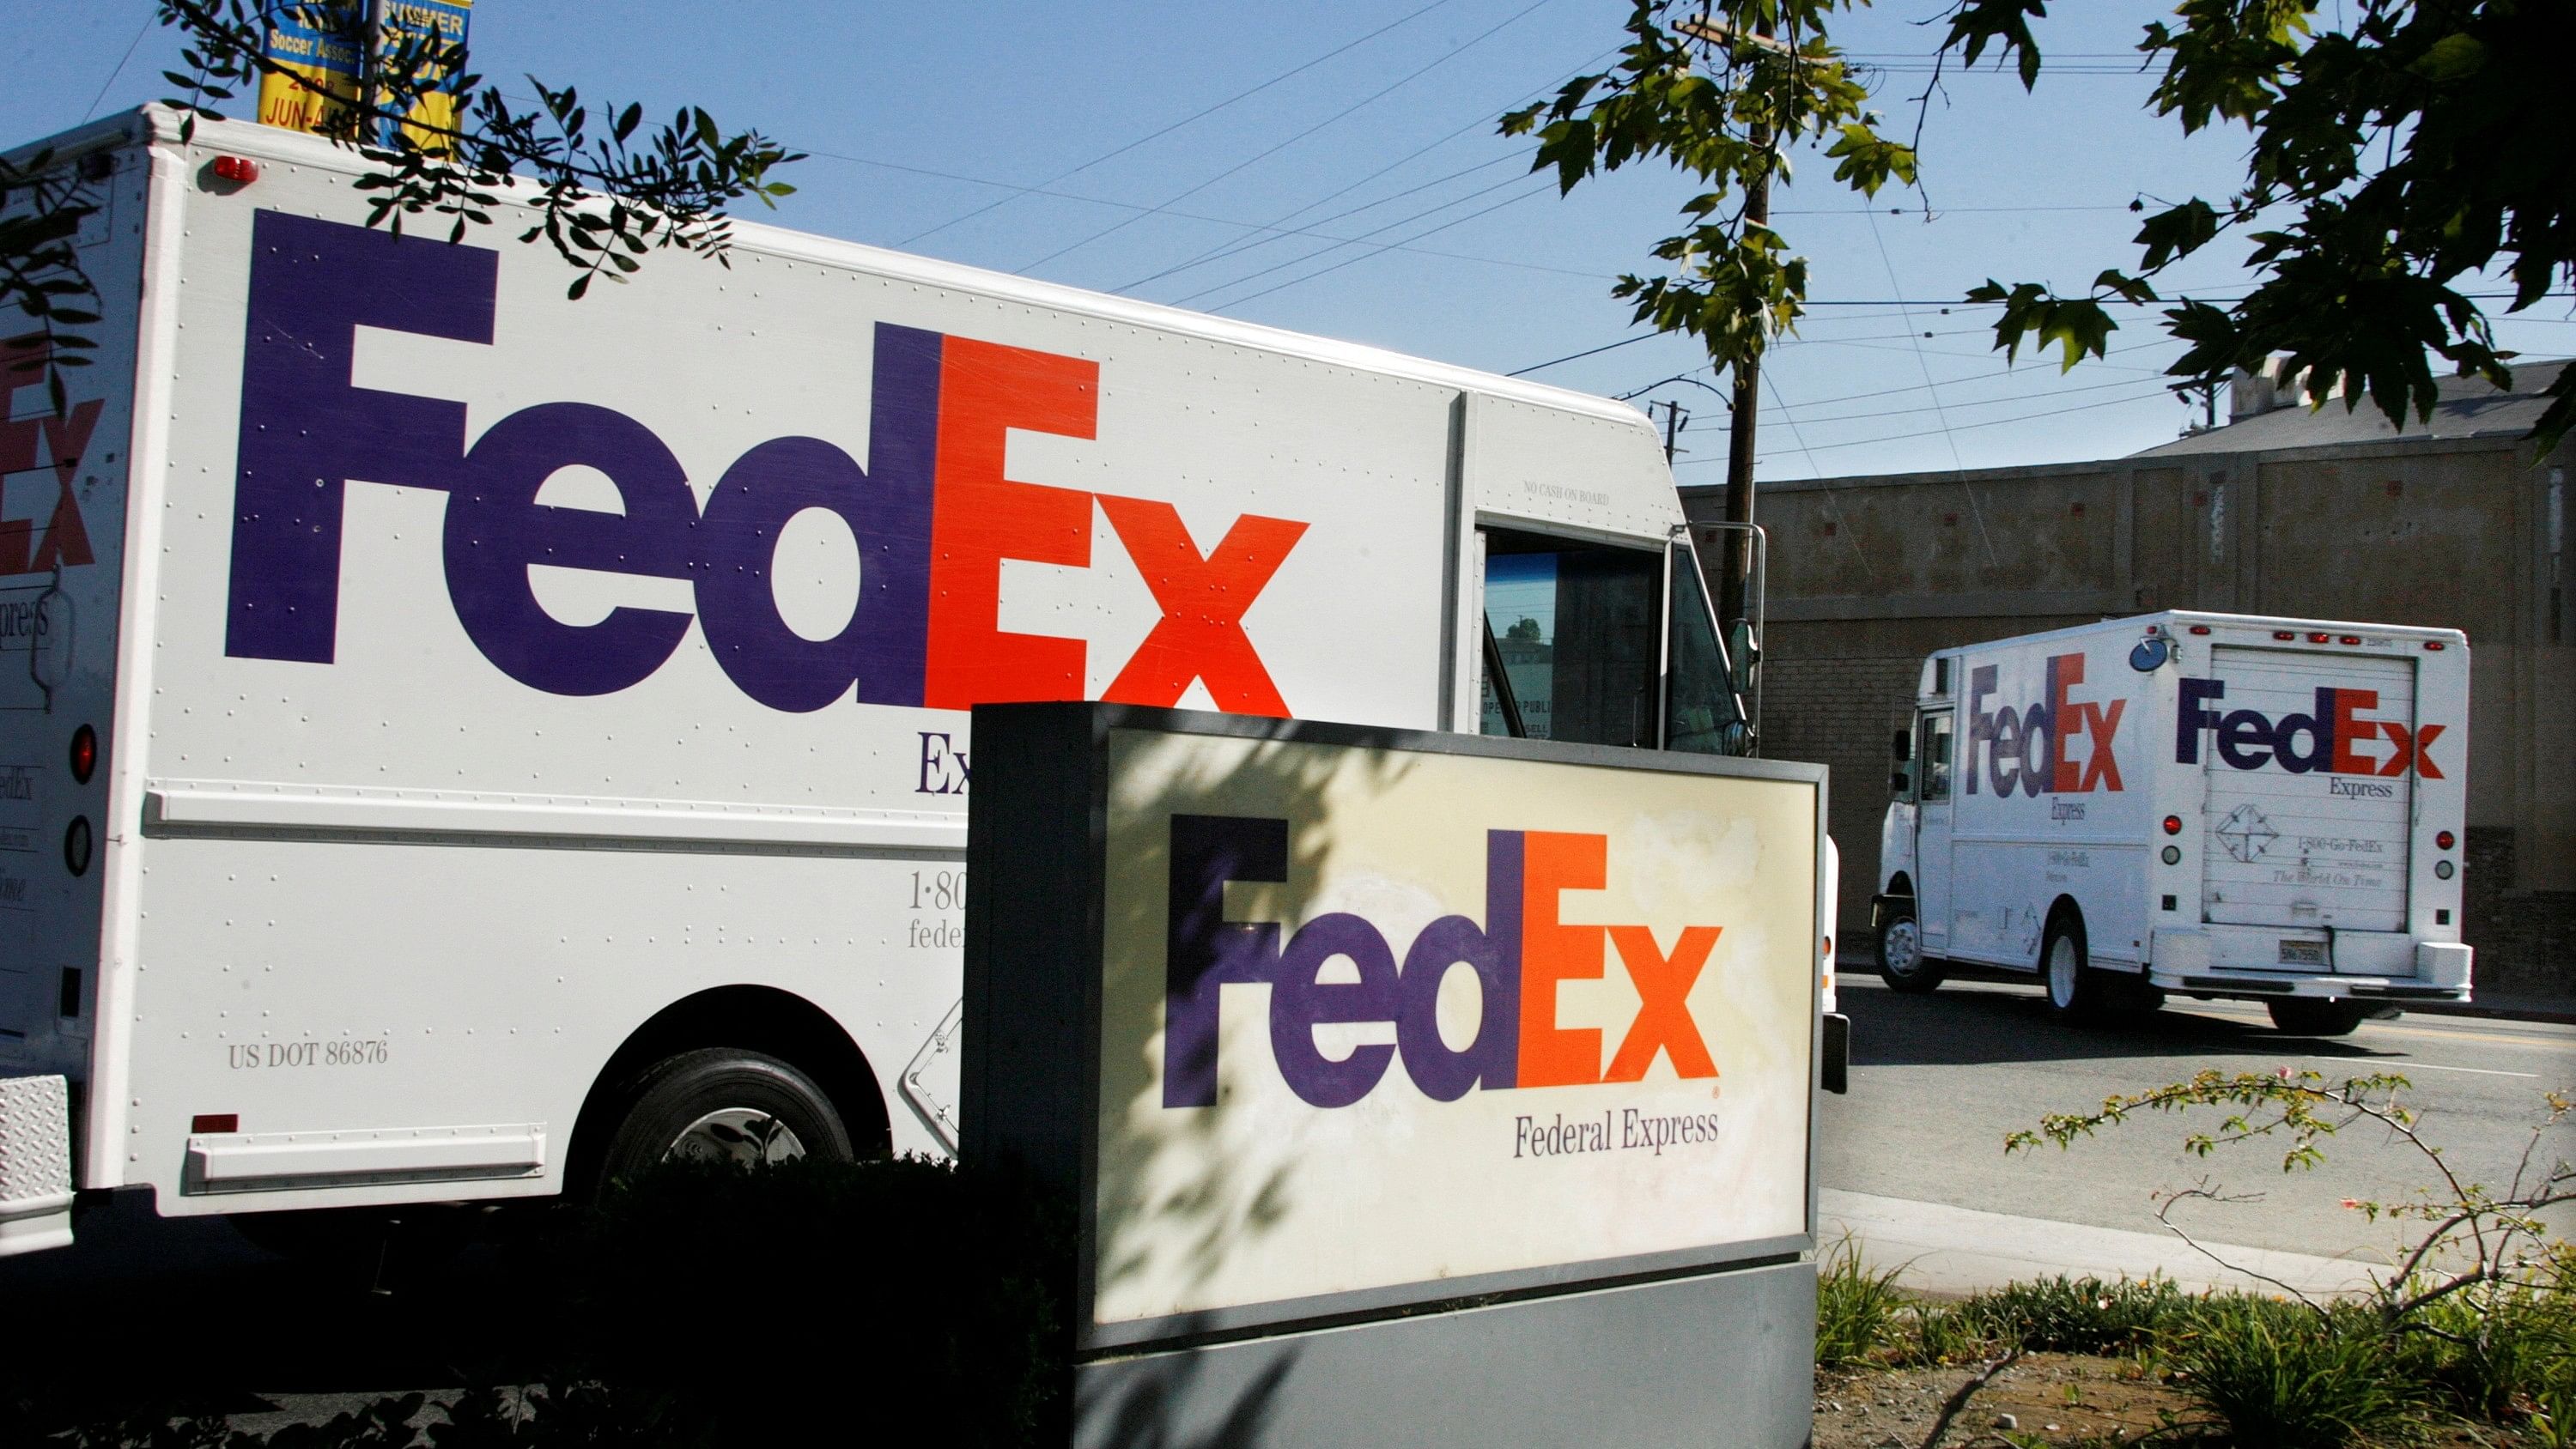 <div class="paragraphs"><p>Federal Express trucks head out for deliveries from a FedEx station in Los Angeles.&nbsp;</p></div>